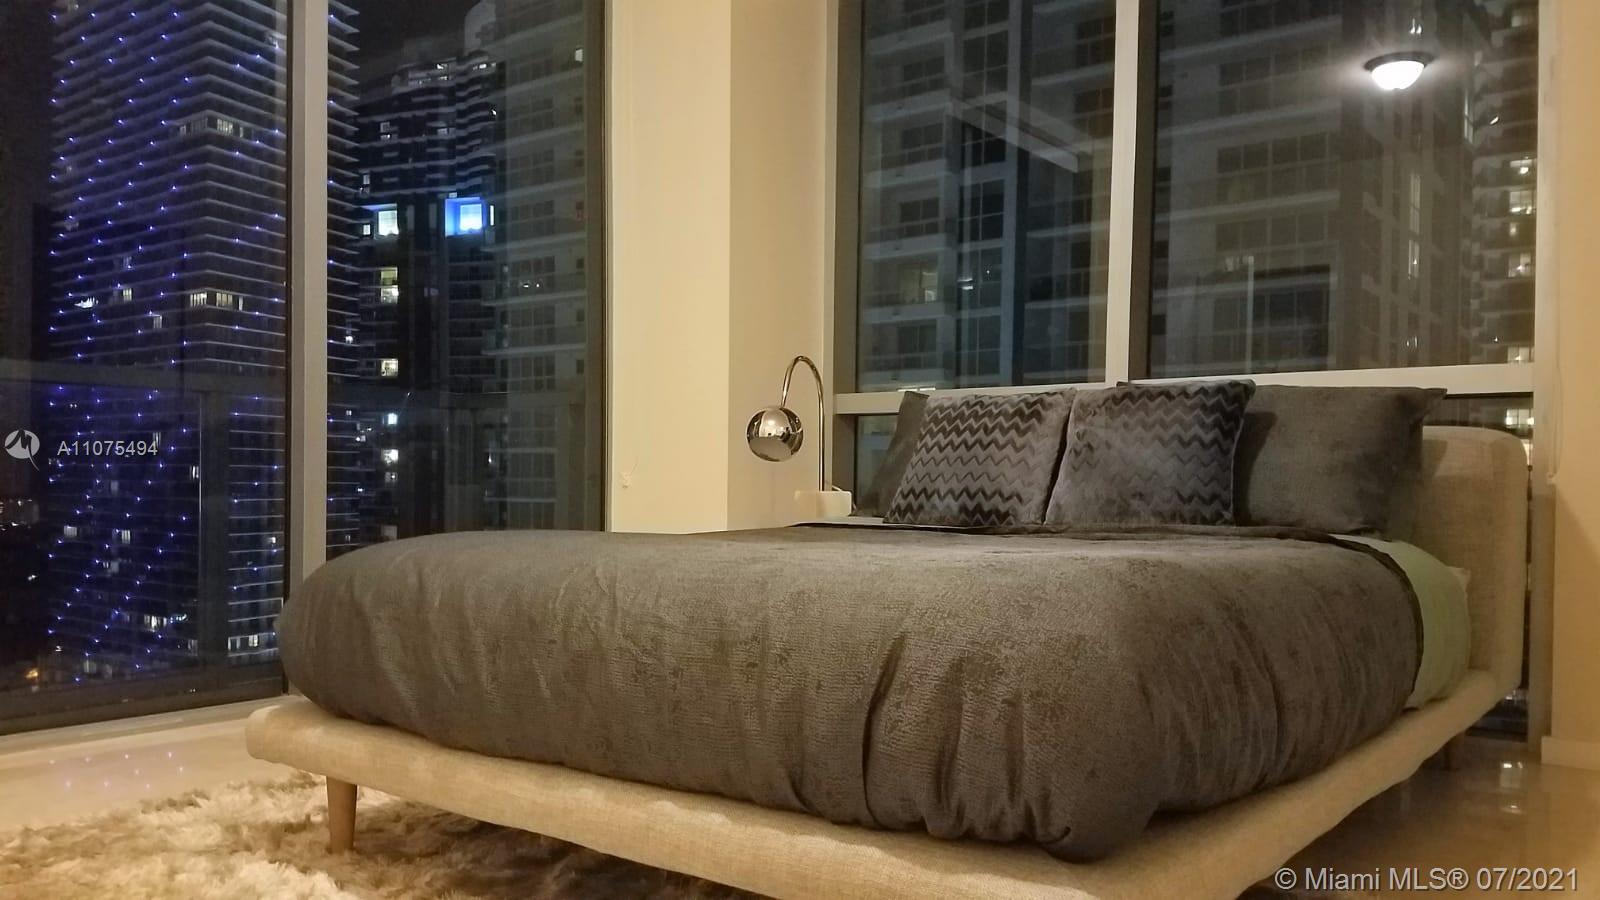 Amazing Corner unit 2 bedrooms and 2 bathrooms in the heart of Brickell. One assigned parking space. for Showings Instructions Please text listing agent.